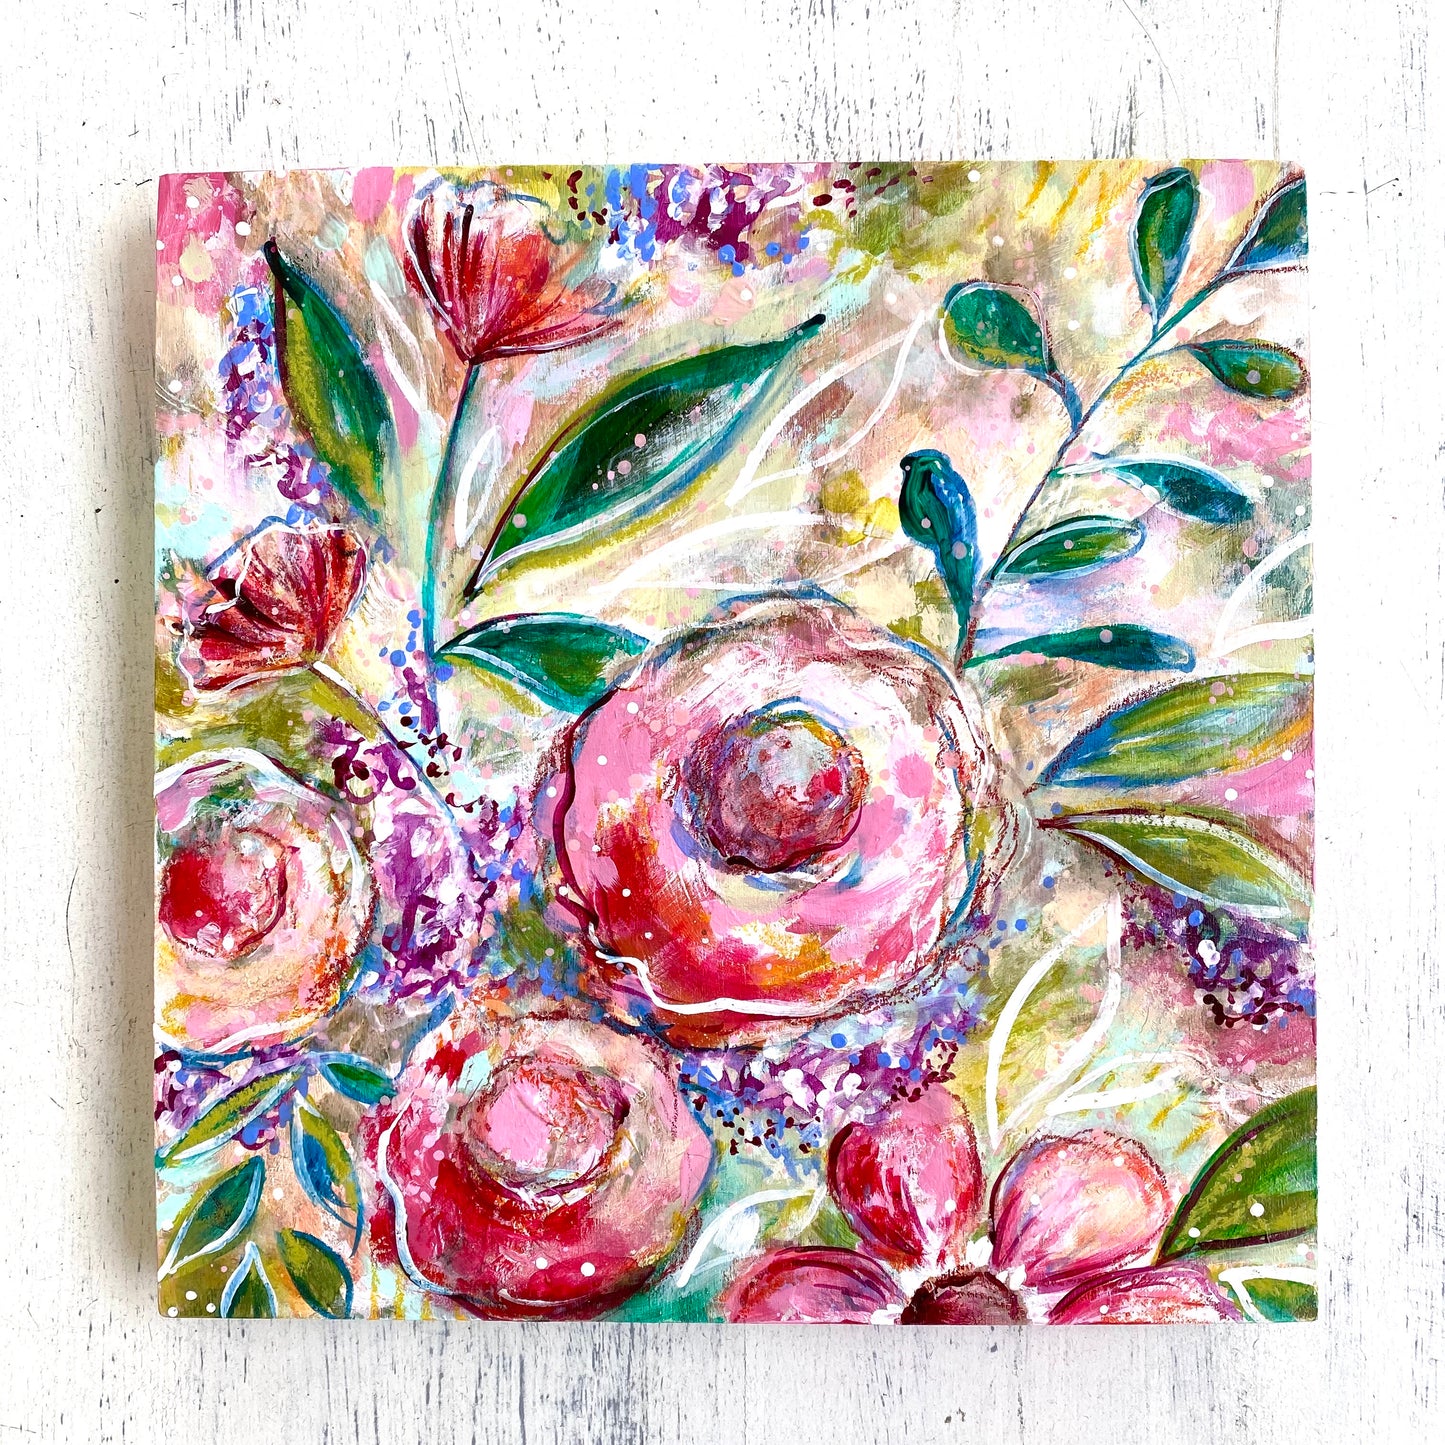 Hope Blooms Spring Floral Mixed Media Painting on 8x8 inch wood panel - Bethany Joy Art